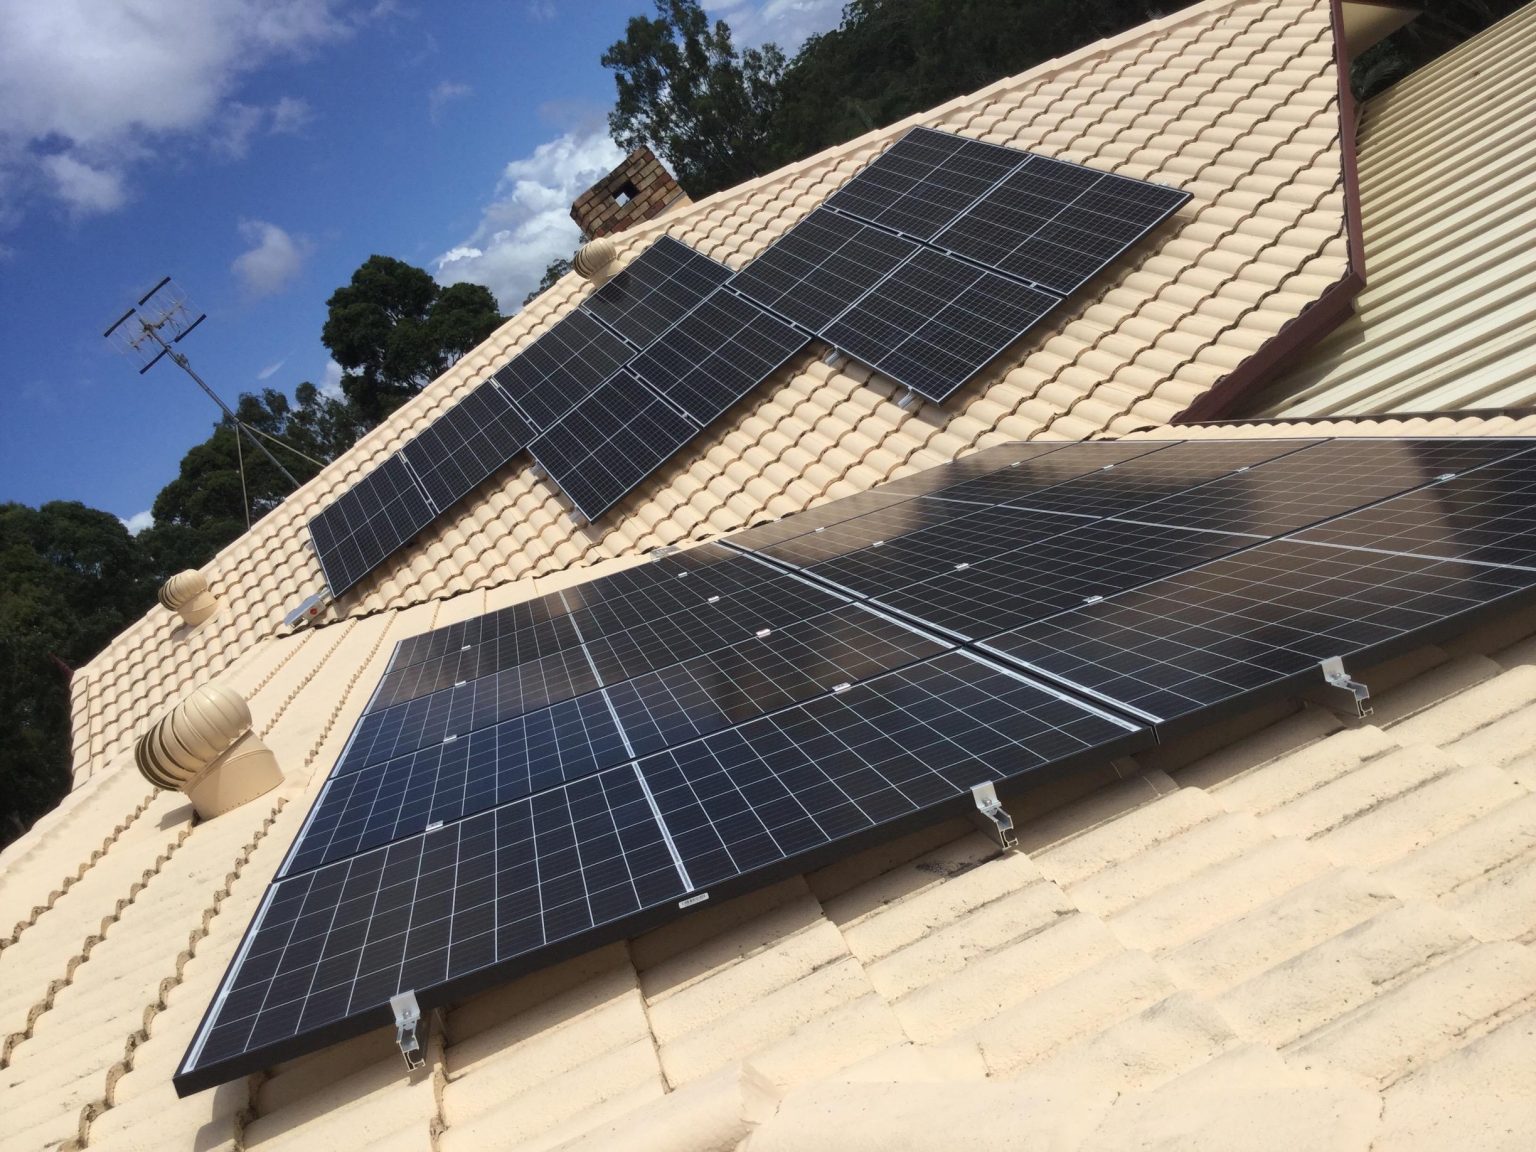 How often do solar panels need cleaning?